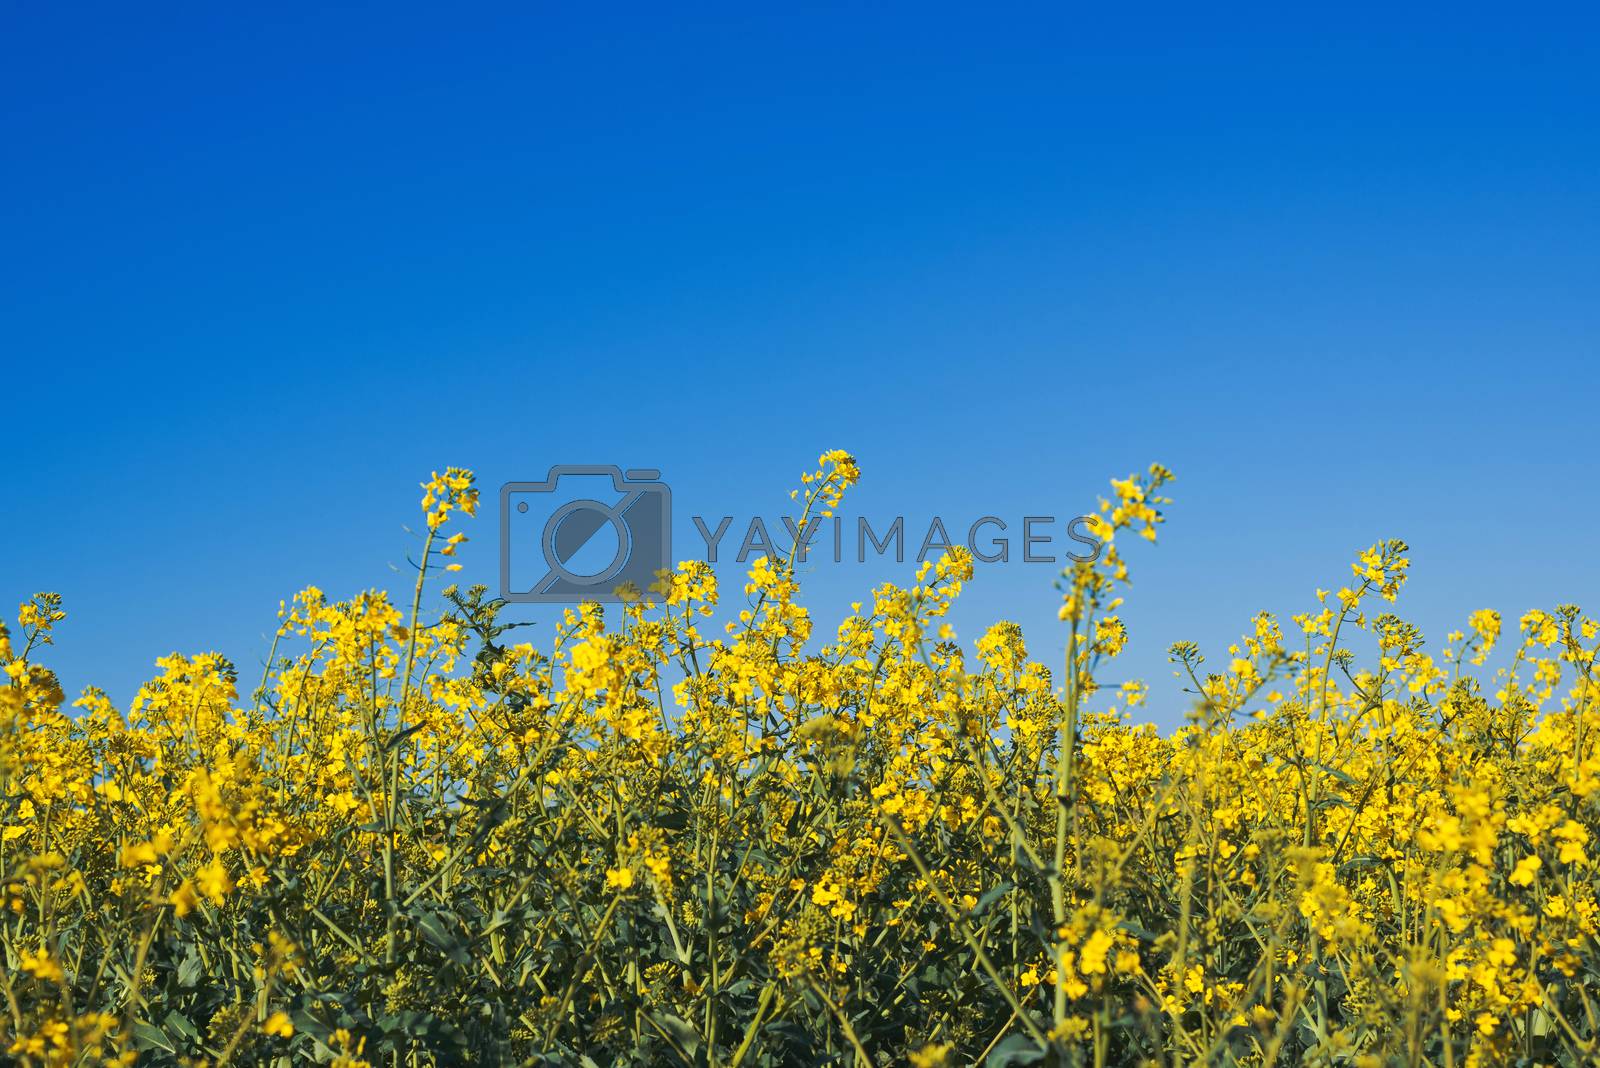 Royalty free image of Oilseed Rapeseed Flowers in Cultivated Agricultural Field by stevanovicigor